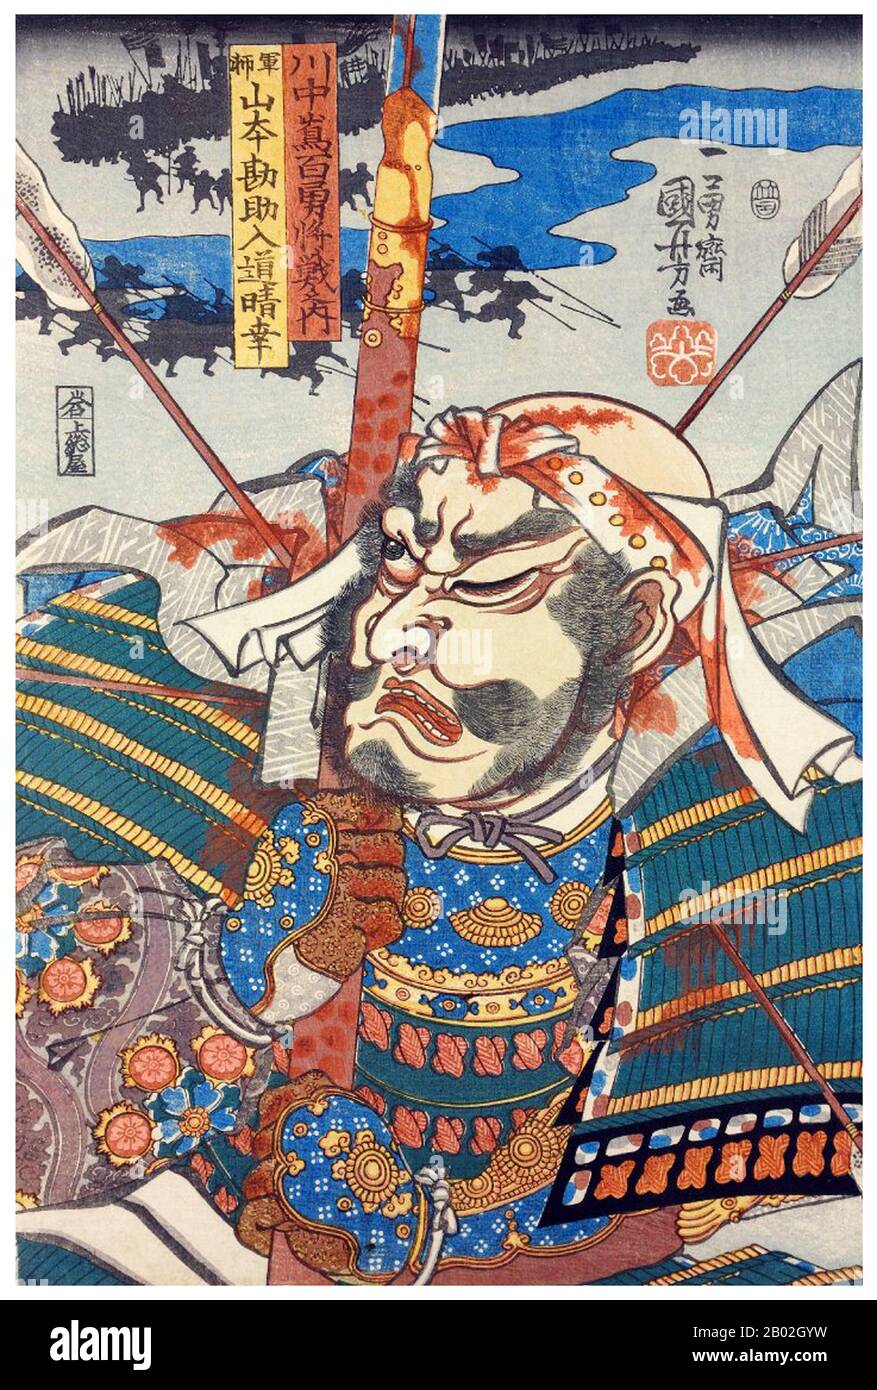 Yamamoto Kansuke (山本 勘助, 1501 – October 18, 1561) was a Japanese samurai of the Sengoku period. He was known as one of the 'Twenty-Four Generals of Takeda Shingen'.  Also known by his formal name, Haruyuki (晴幸), he was a brilliant strategist, and is particularly known for his plan which led to victory in the fourth battle of Kawanakajima (September 10, 1561) against Uesugi Kenshin. However, Kansuke never lived to see his plan succeed; thinking it to have failed, he charged headlong into the enemy ranks, dying in battle. Stock Photo